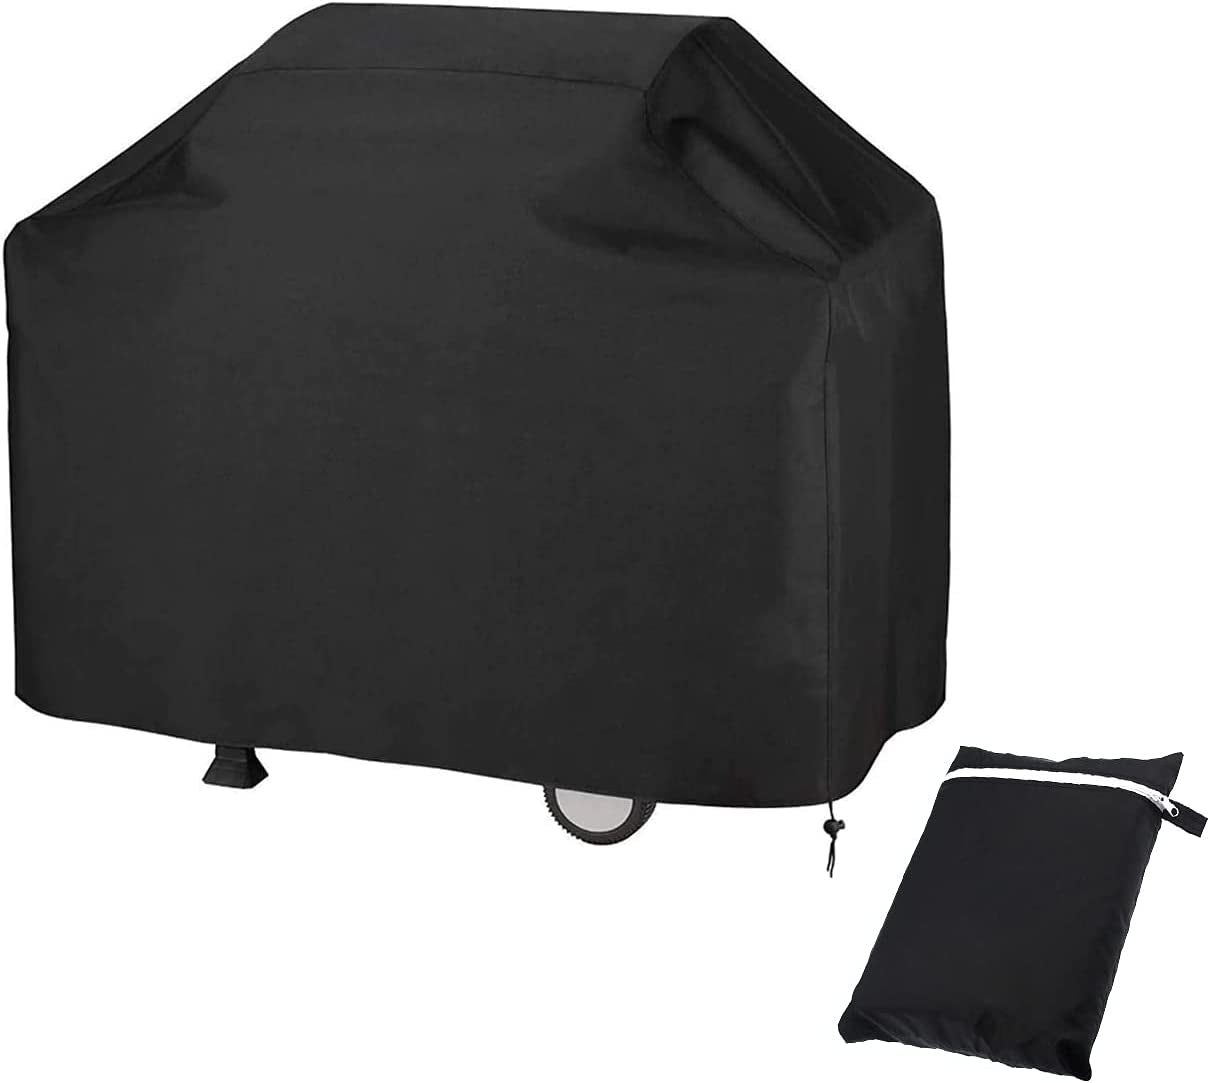 Mayhour, Mayhour 27 Inch Indoor Outdoor BBQ Cover Adjustable Grill Dedicated,Waterproof Gas Grill Cover for Weber, Char-Broil, Brinkmann,Tepro Etc, UV &Dust Resistant Oxford Durable Material (Xs(27"-Round))